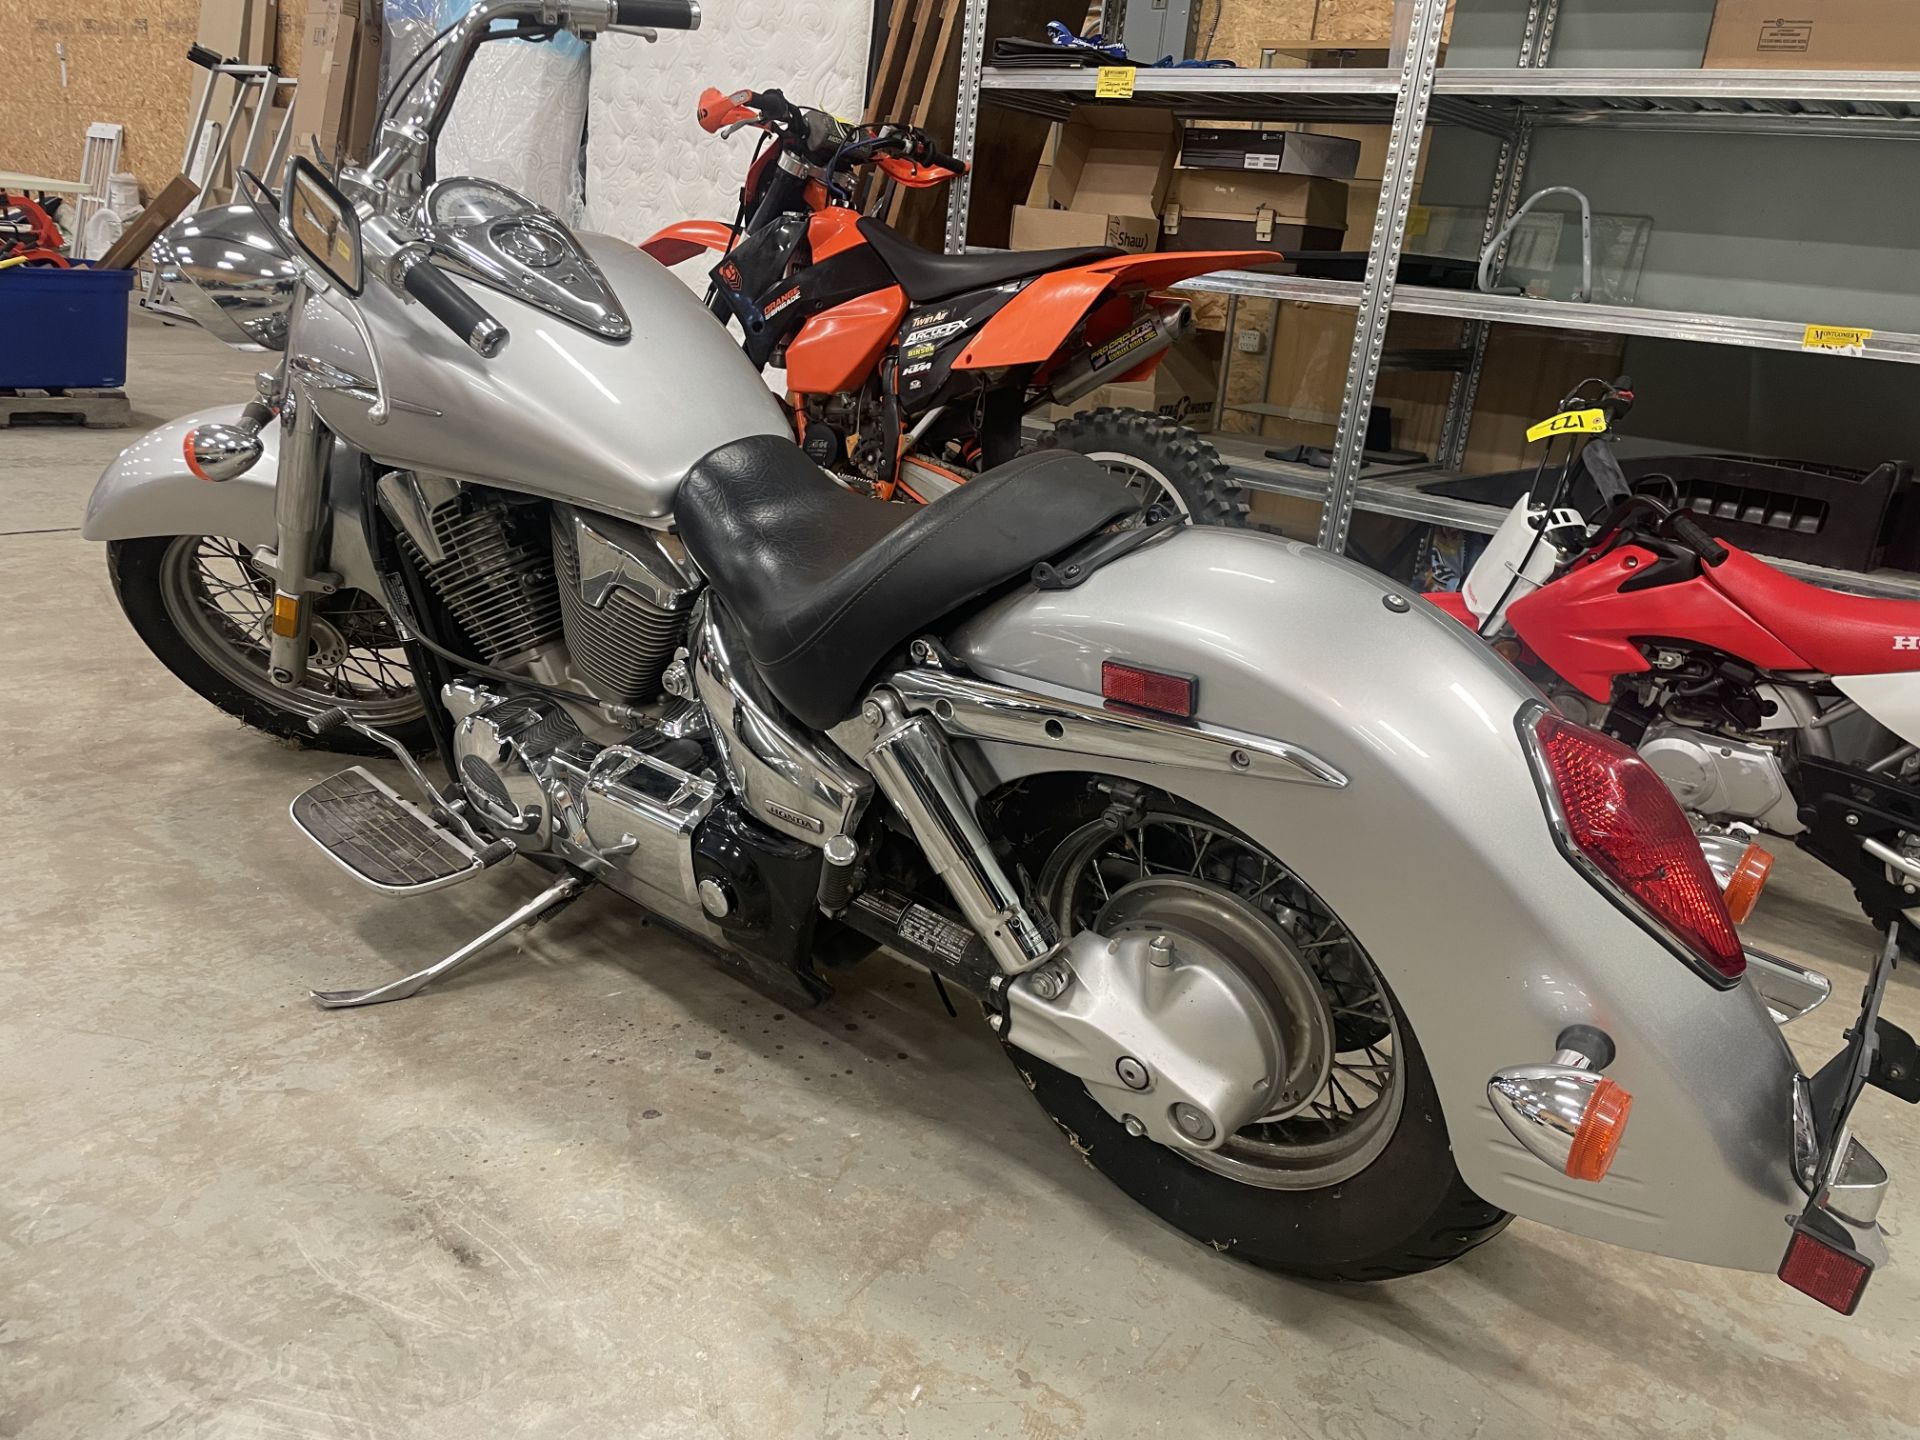 2006 HONDA VTX1300S6 MOTORCYCLE W/ WINDSHIELD INCLUDED (INSTALLATION REQUIRED) 5067 KM SHOWING - Image 3 of 12